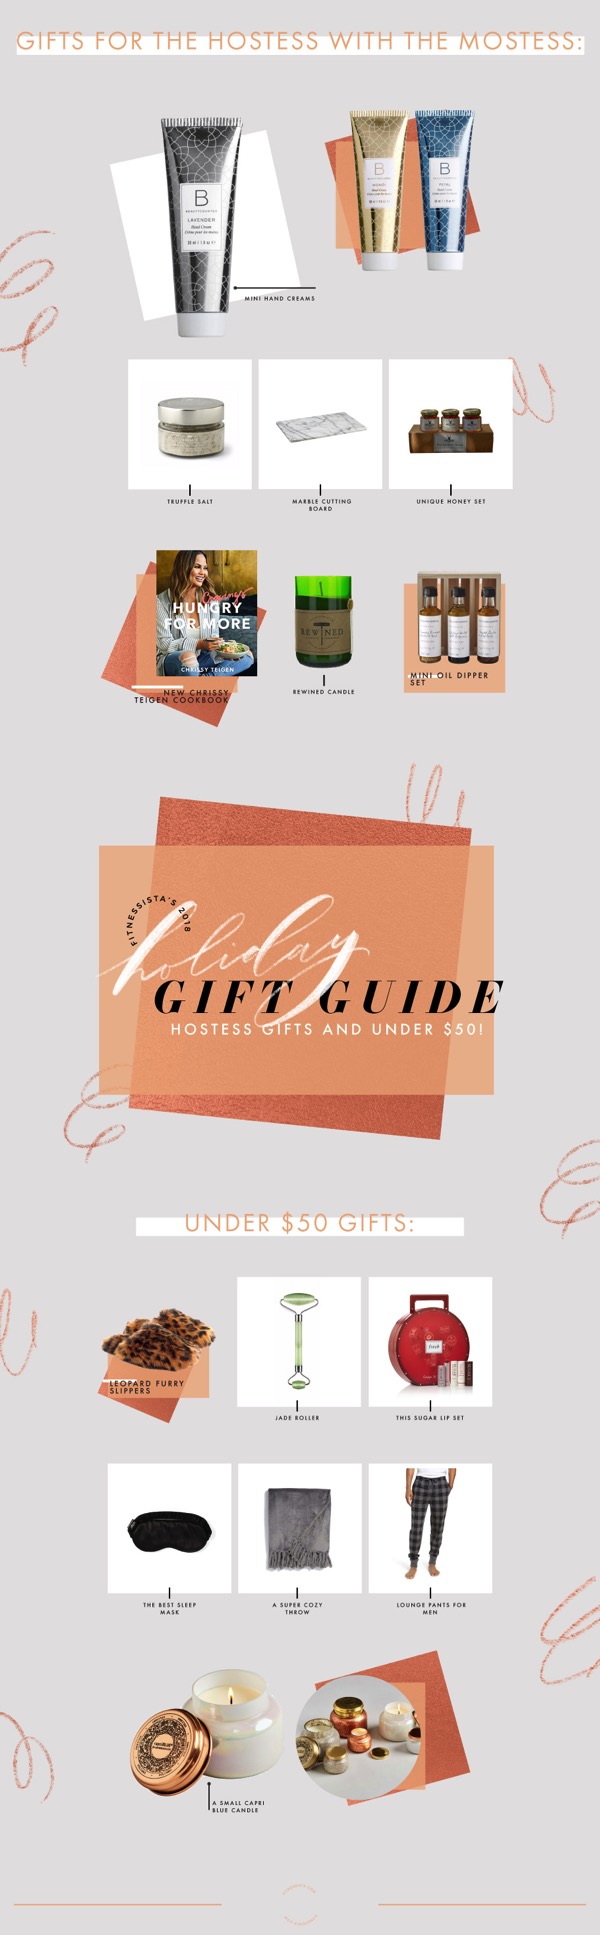 Holiday Gift Guide 2018 Hostess Gifts and Under 50